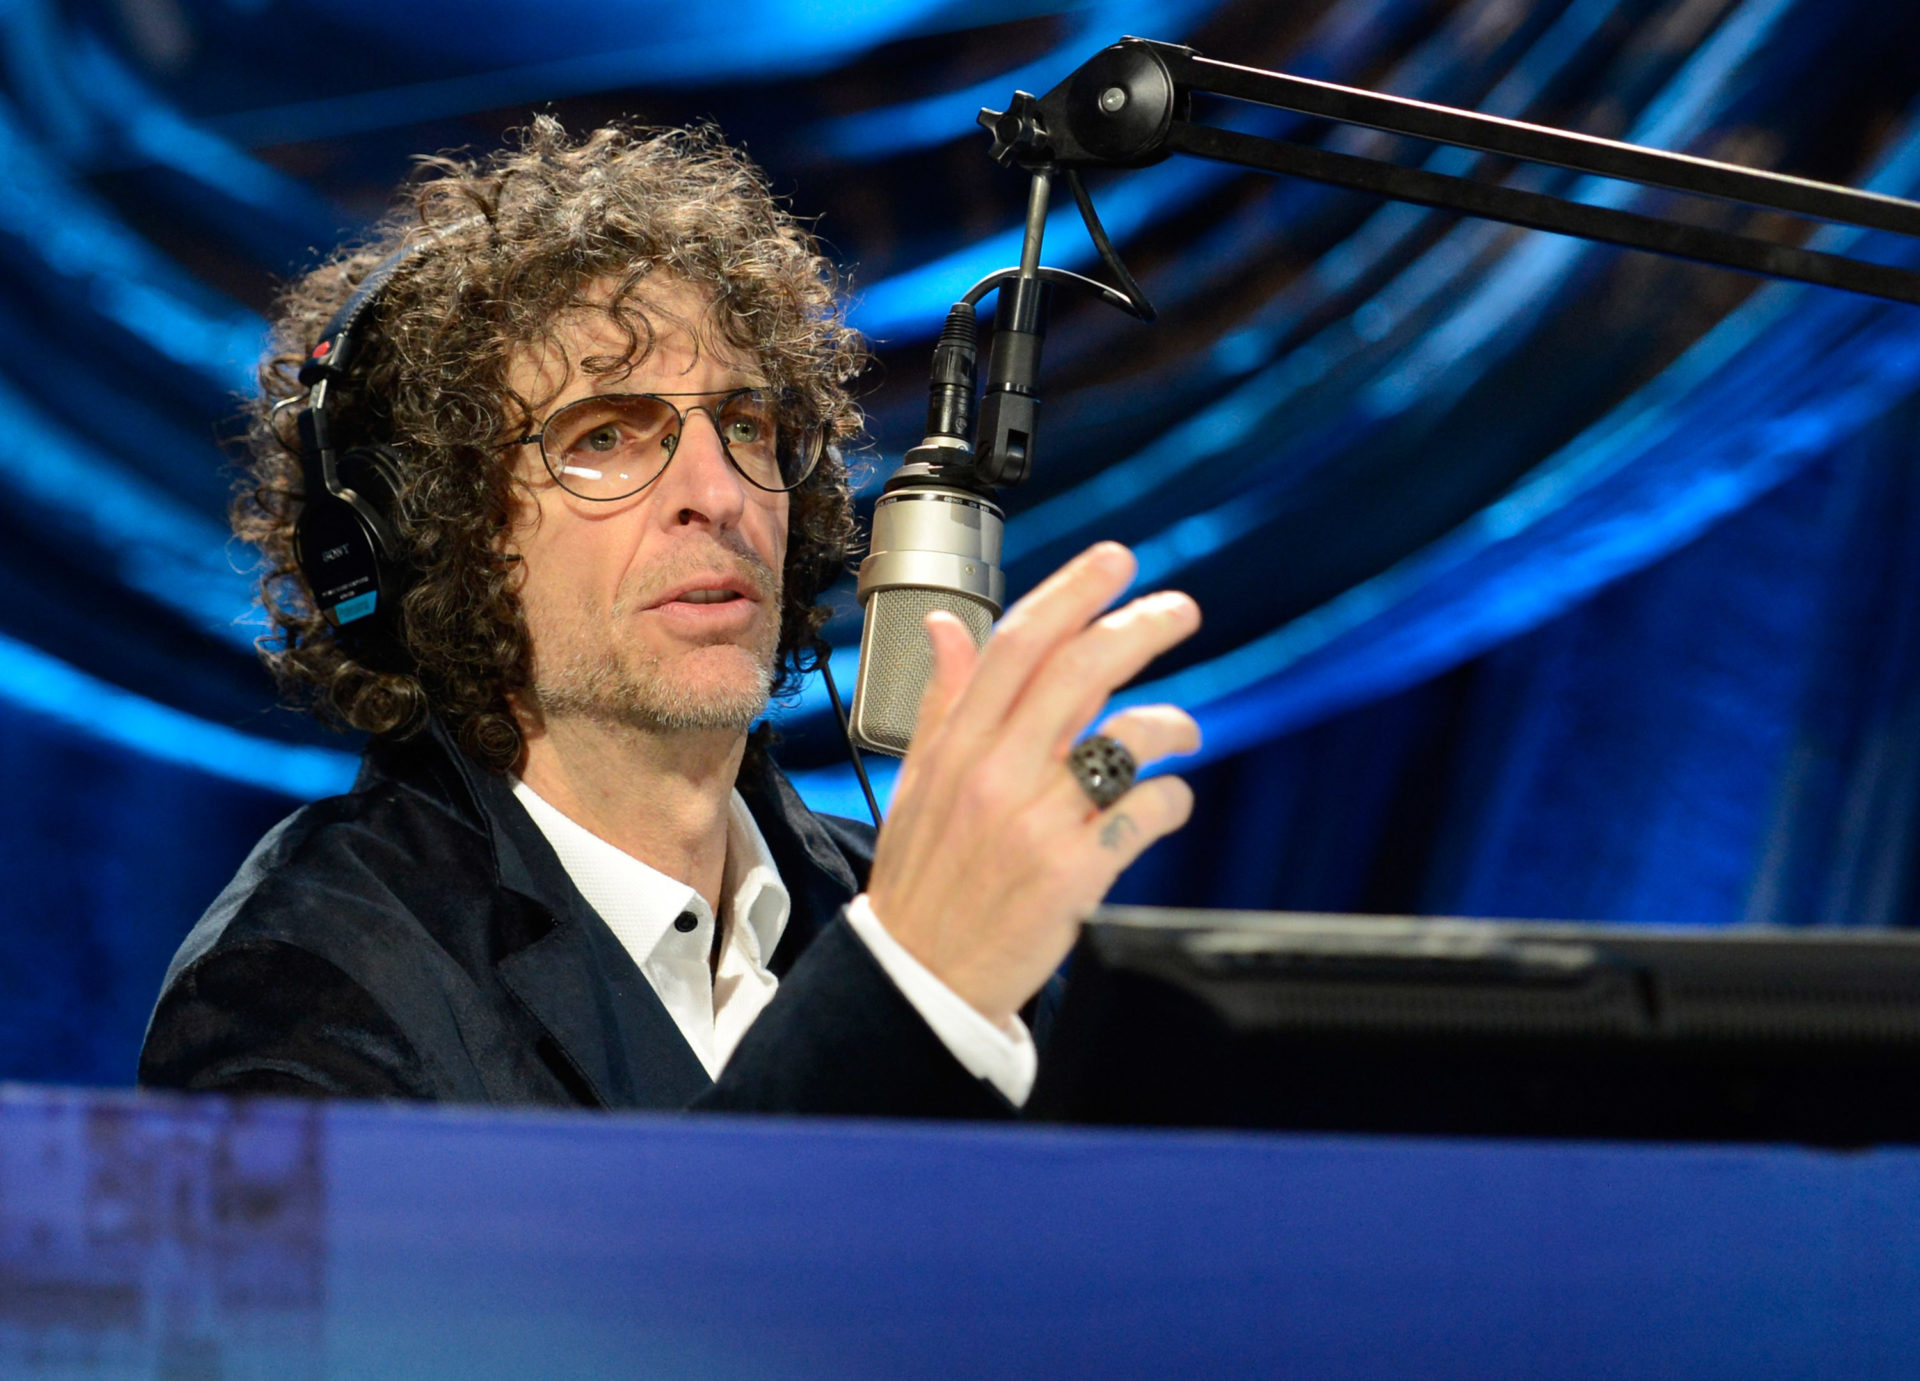 "Howard Stern's Birthday Bash" Presented By SiriusXM, Produced By Howard Stern Productions - Inside